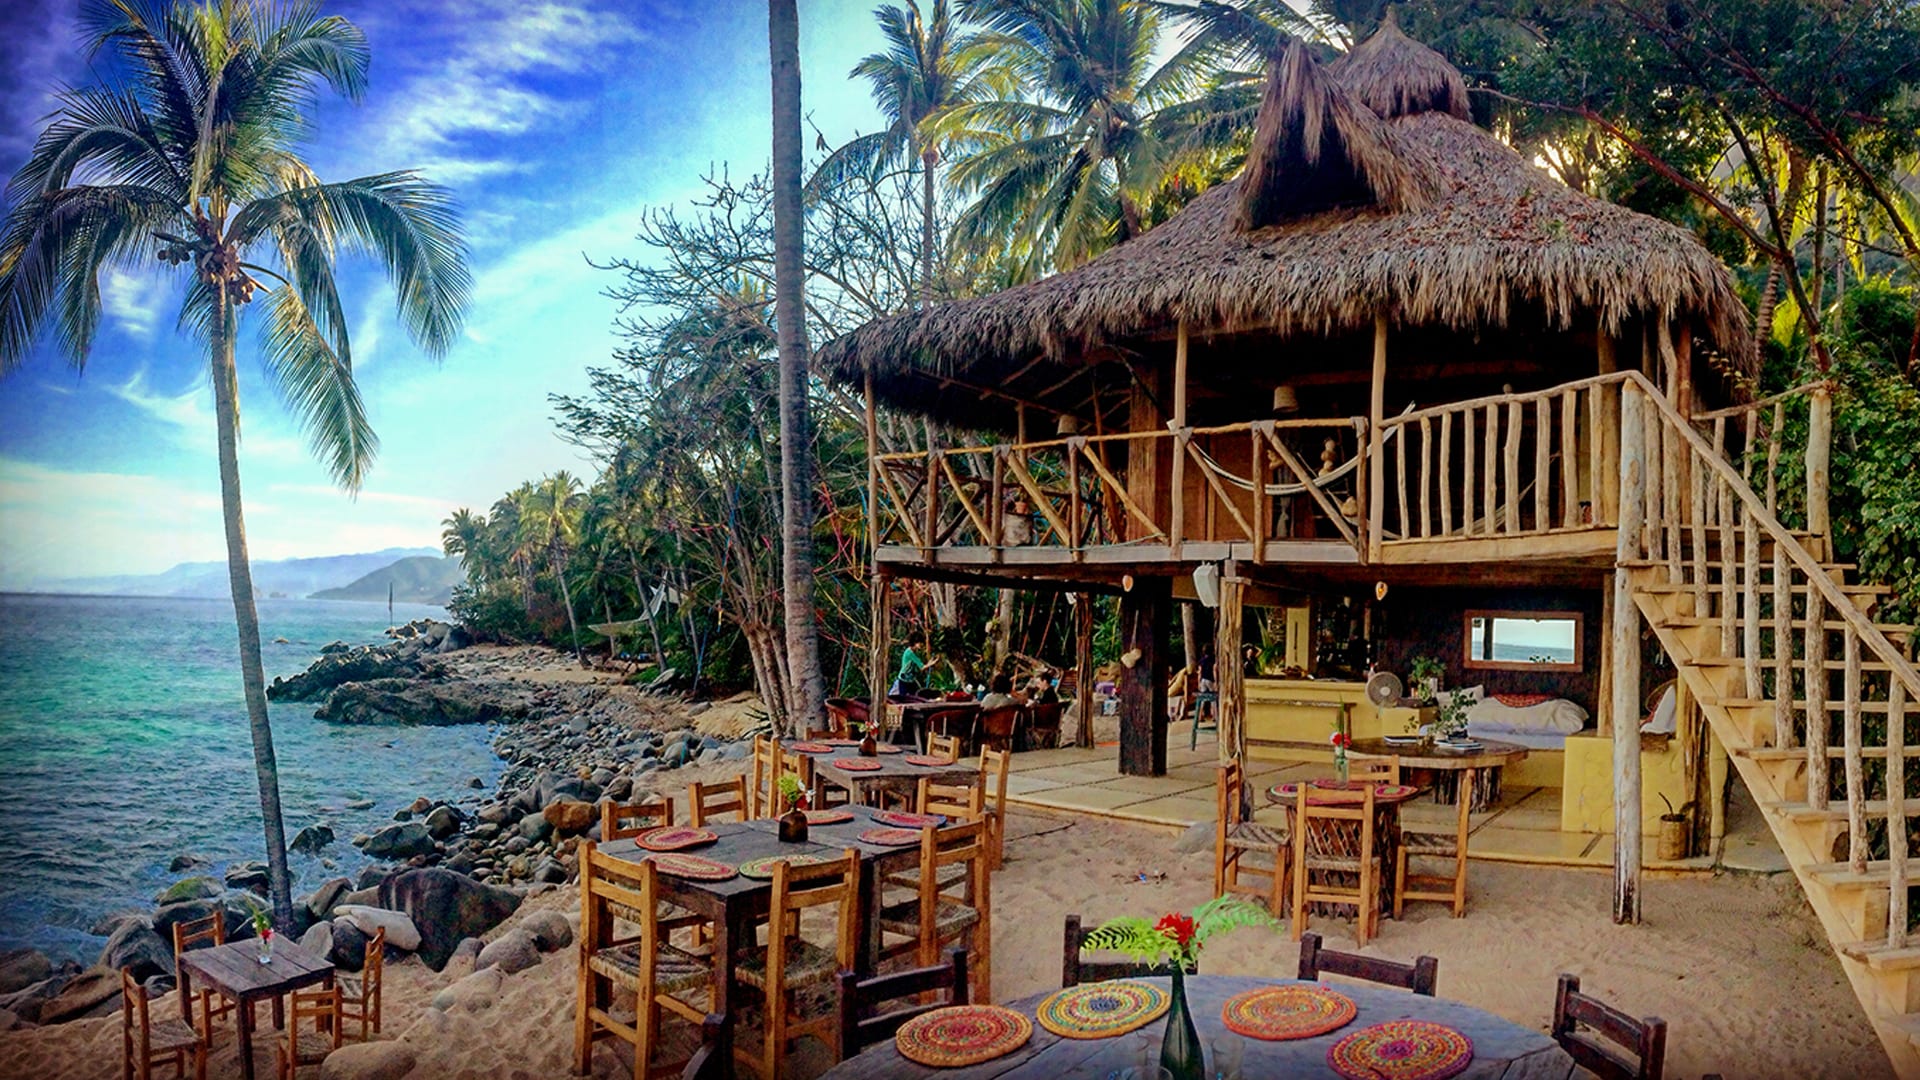 Two story palapa on the beach